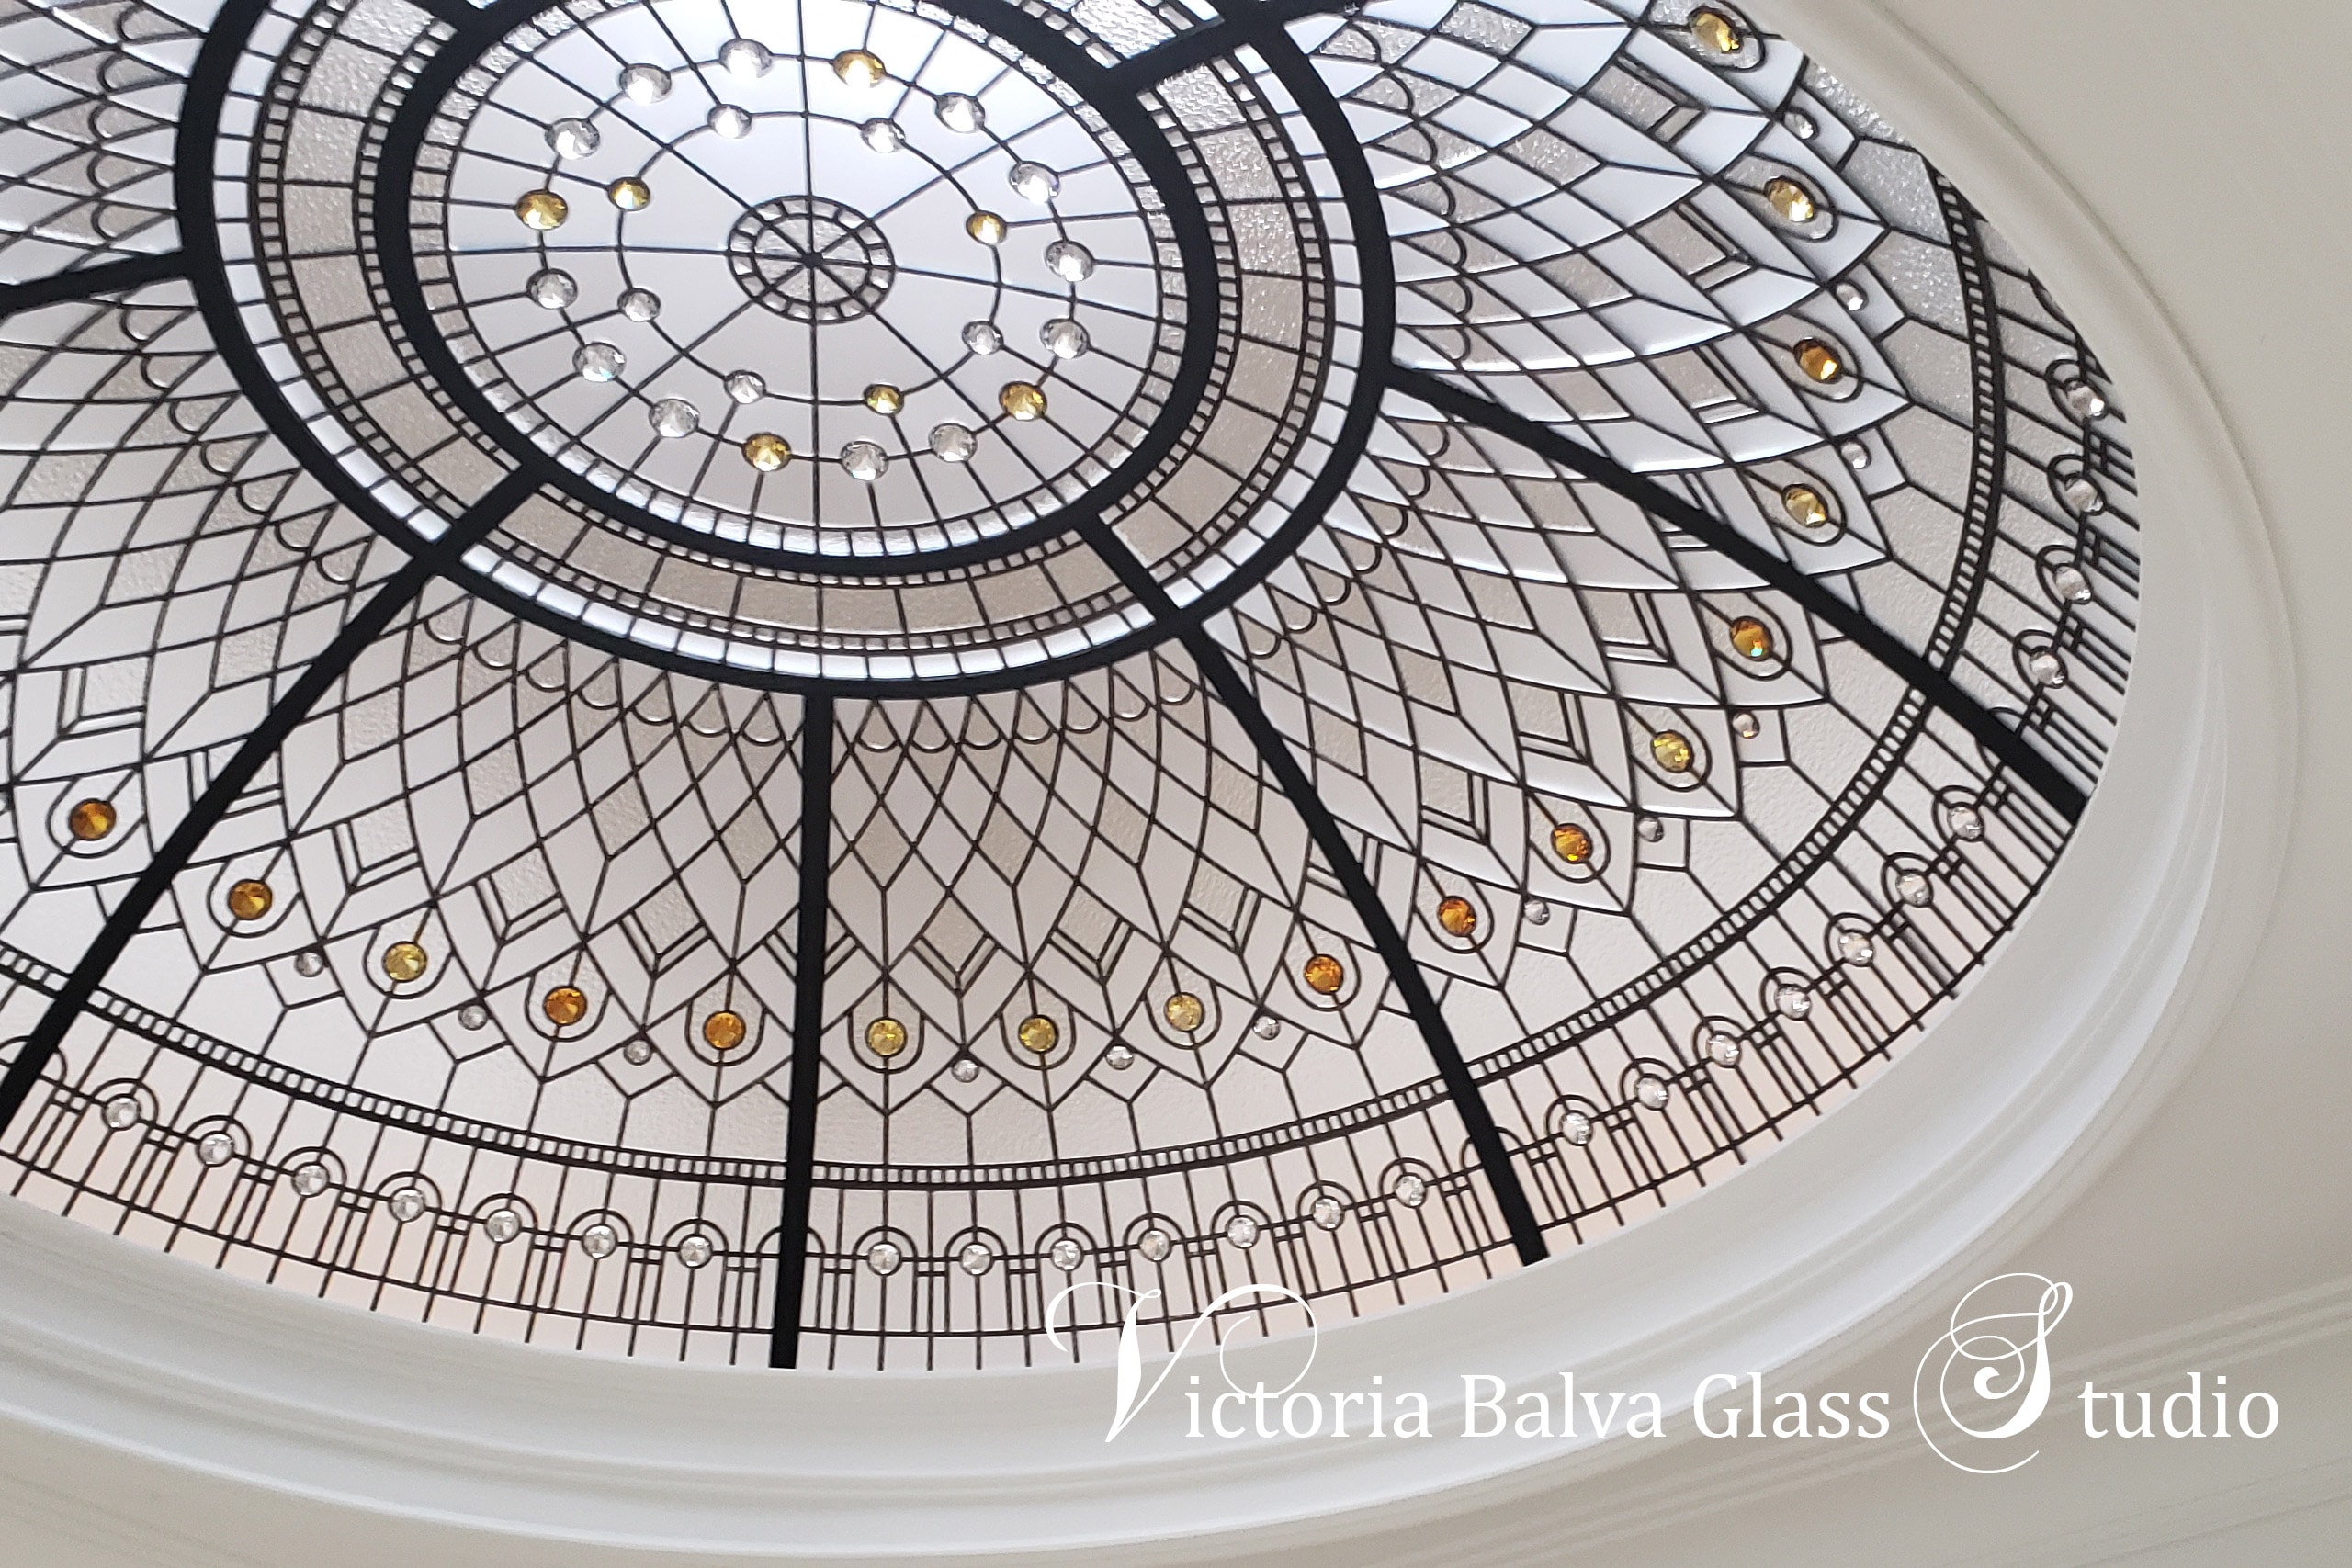 Custom stained glass dome skylight for a grand entryway foyer of the custom built house in Brampton. Clear textured glasses with pale coloured jewels make this stained glass dome design a crown jewel of the house